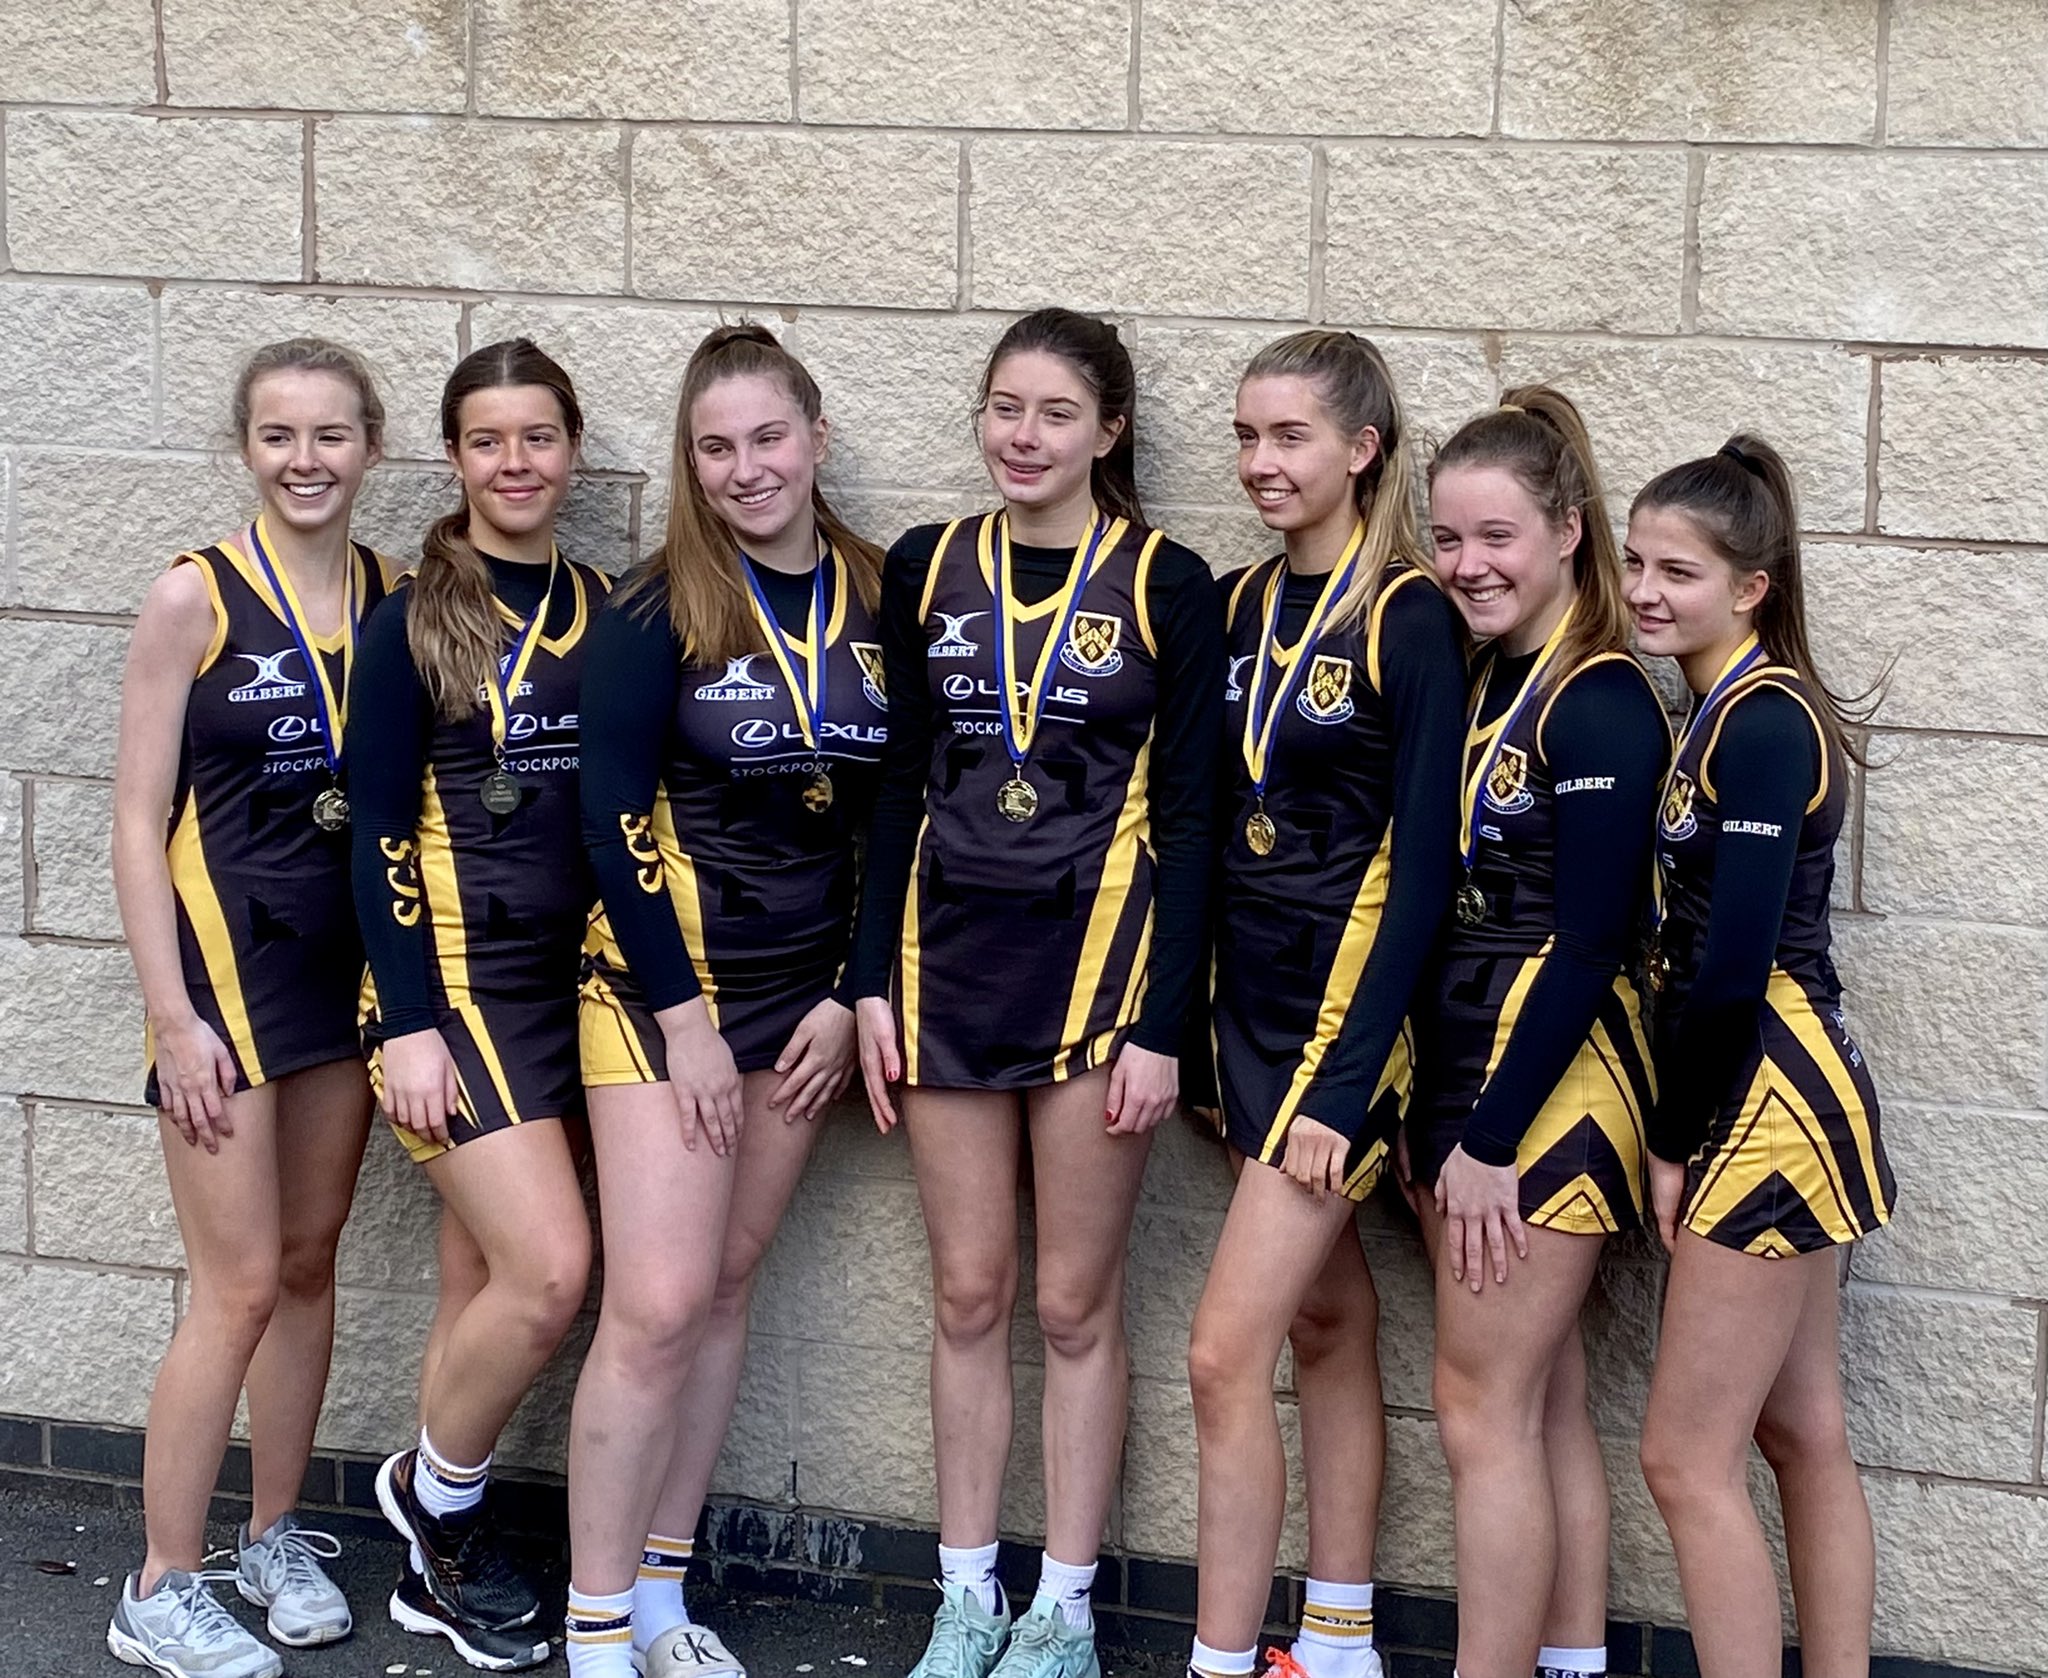 Players from the U16 County Netball team